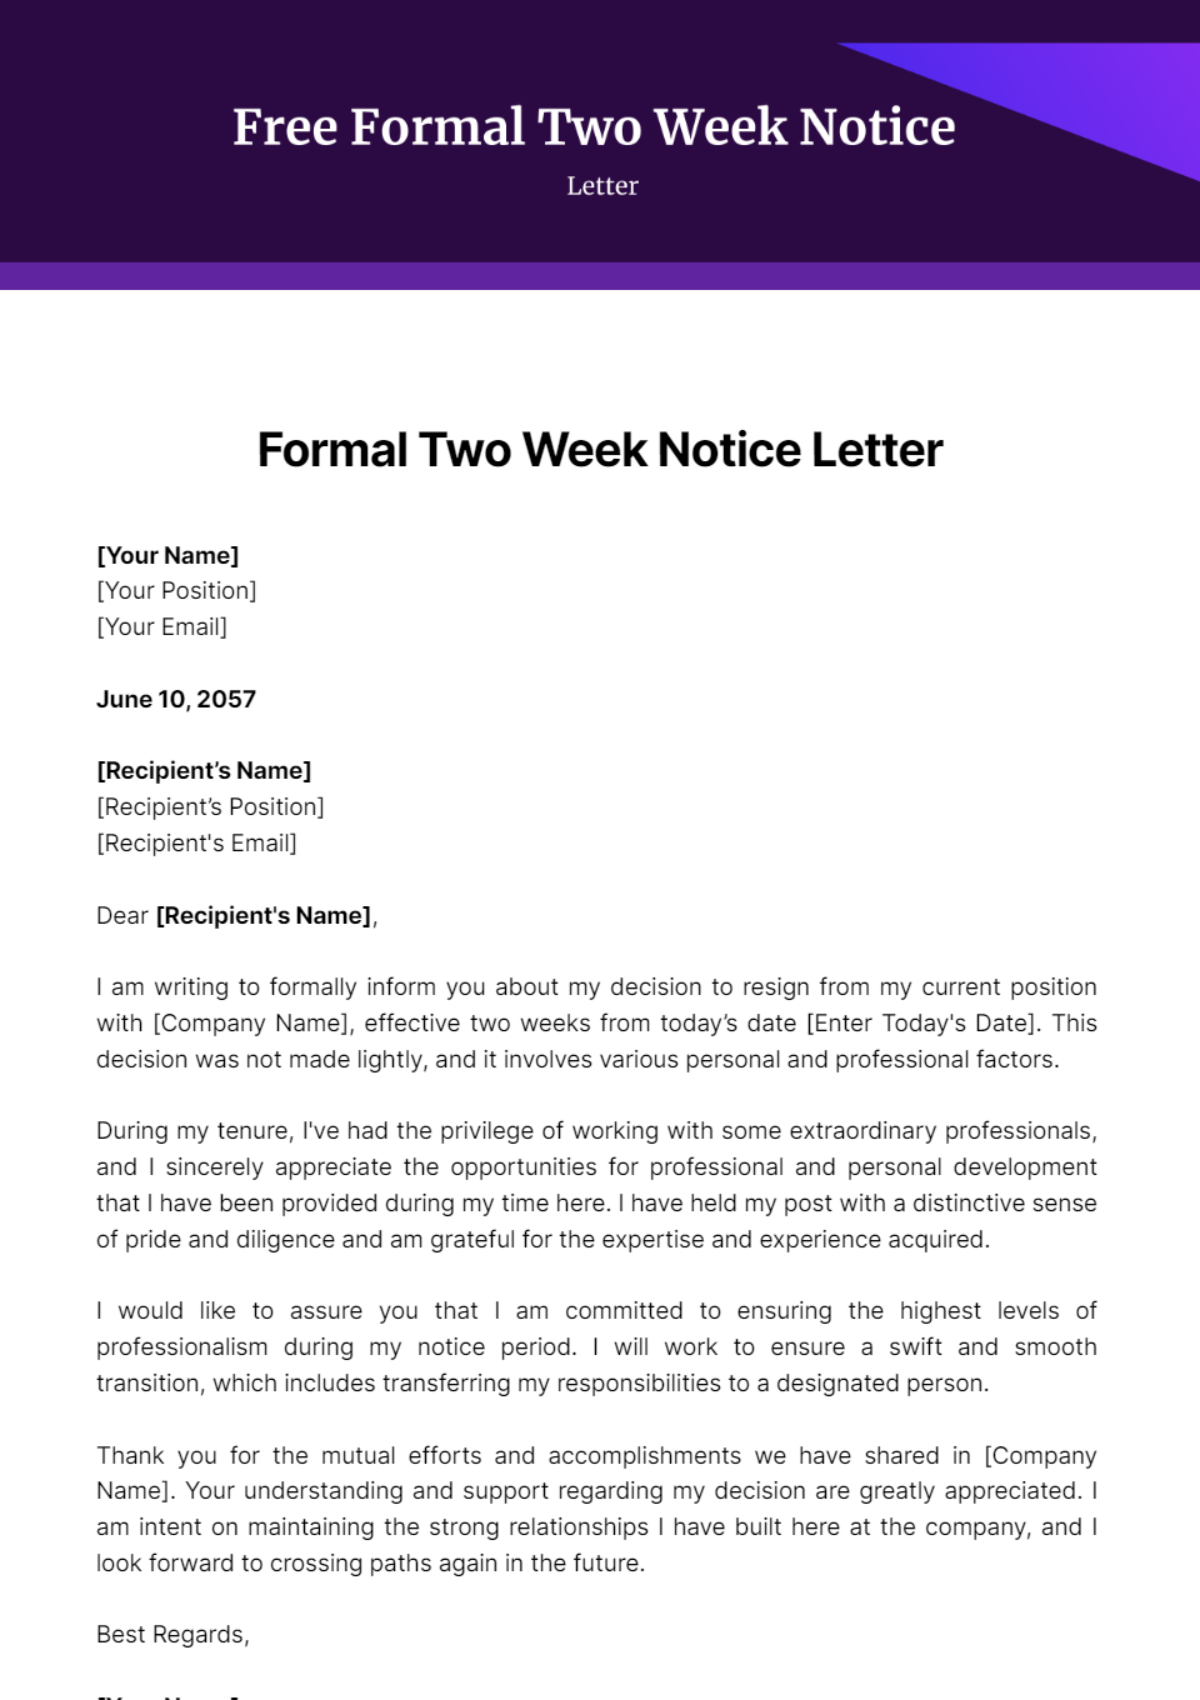 Free Formal Two Week Notice Letter Template